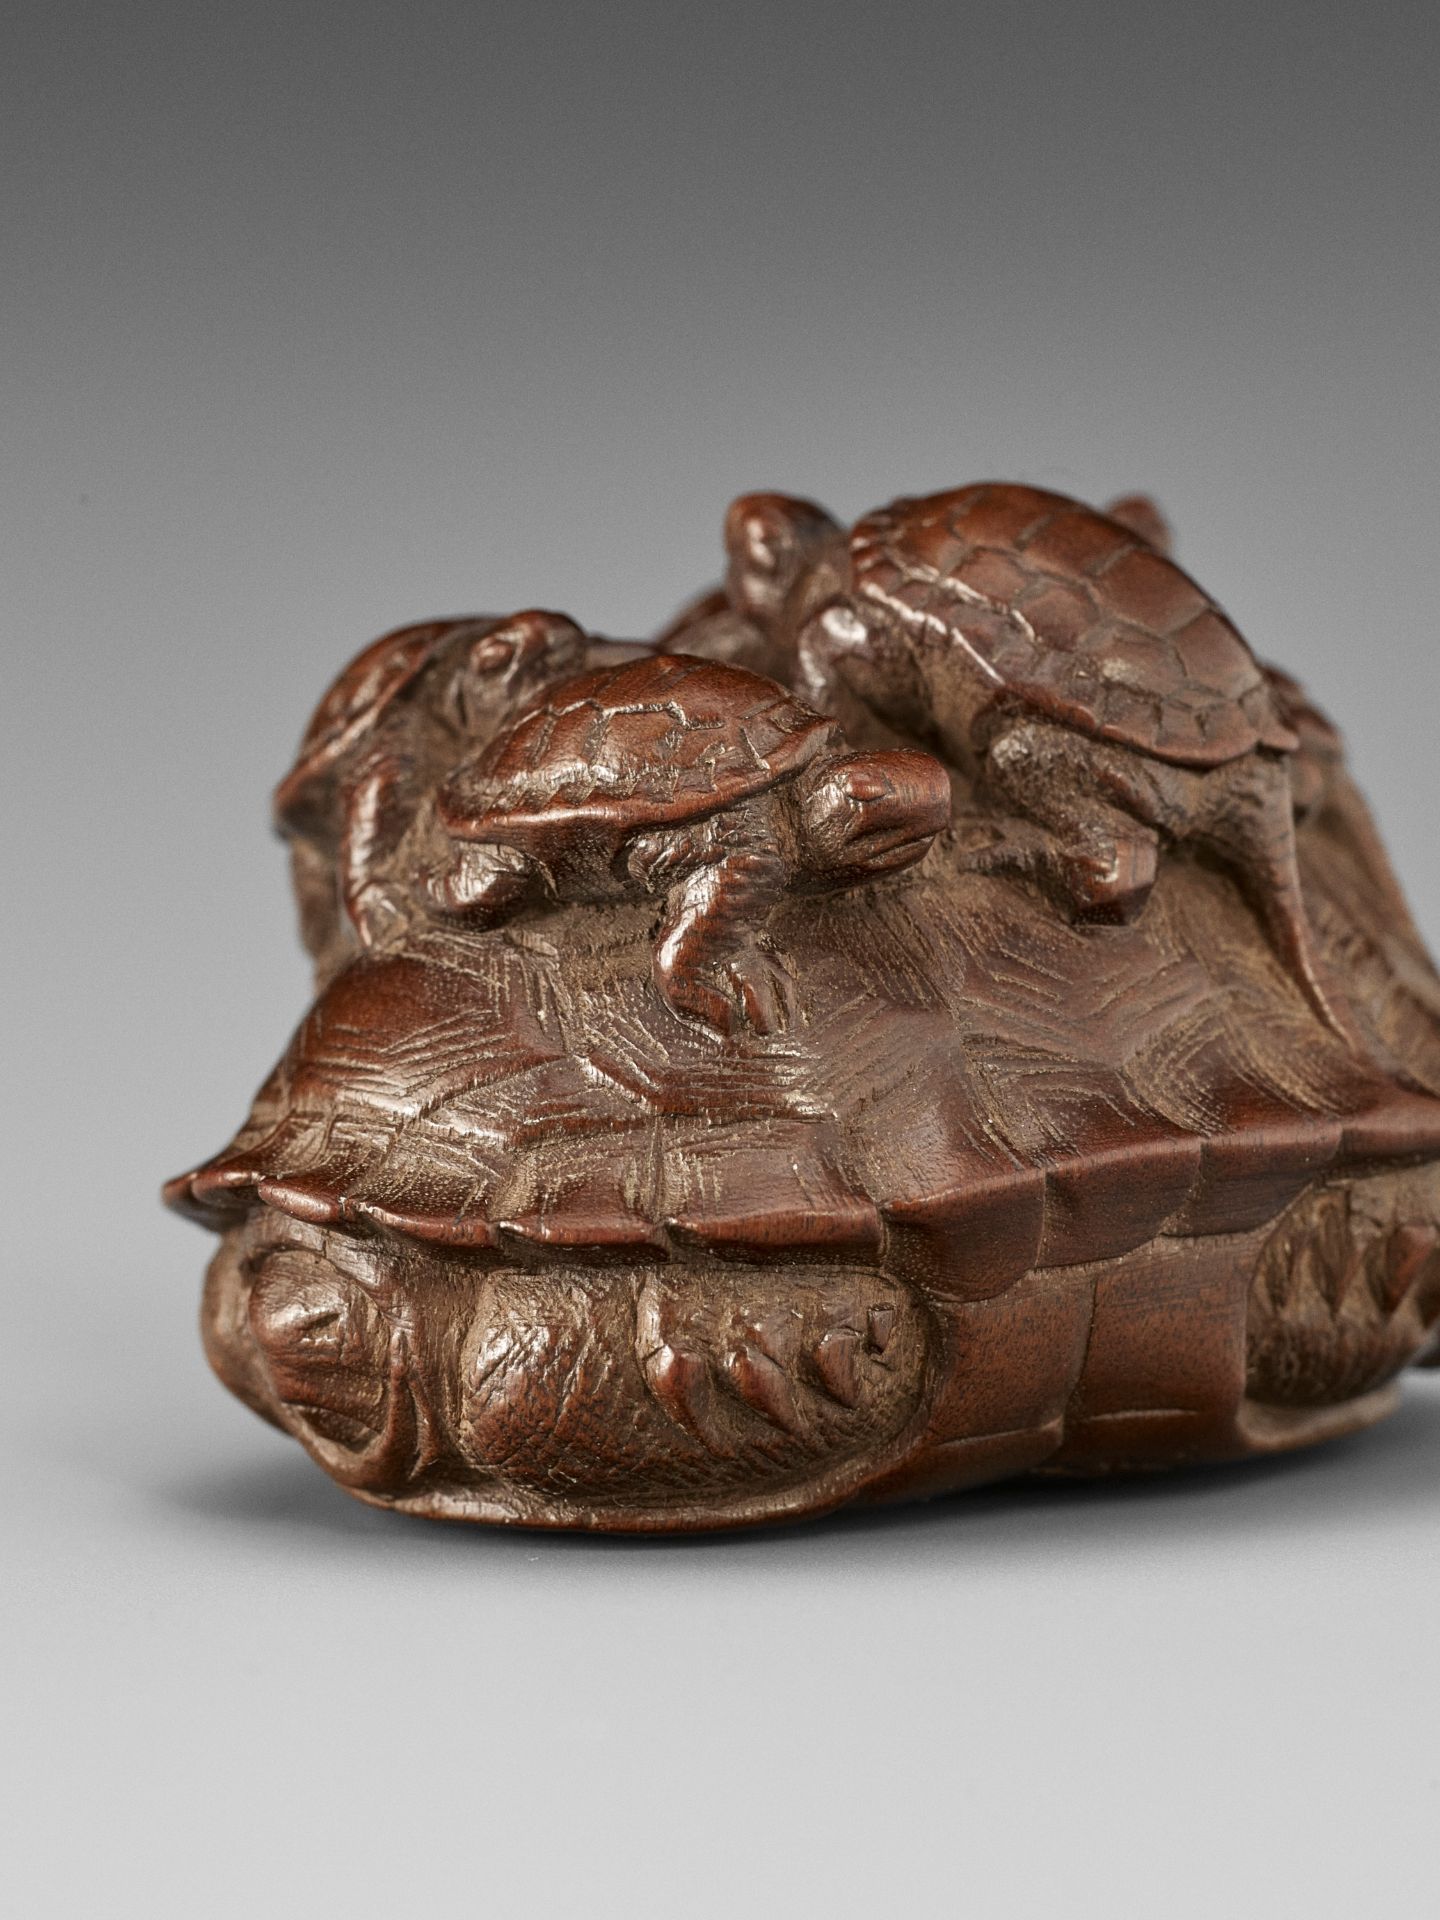 TOMIN: A FINE WOOD NETSUKE OF A TORTOISE WITH FIVE YOUNG